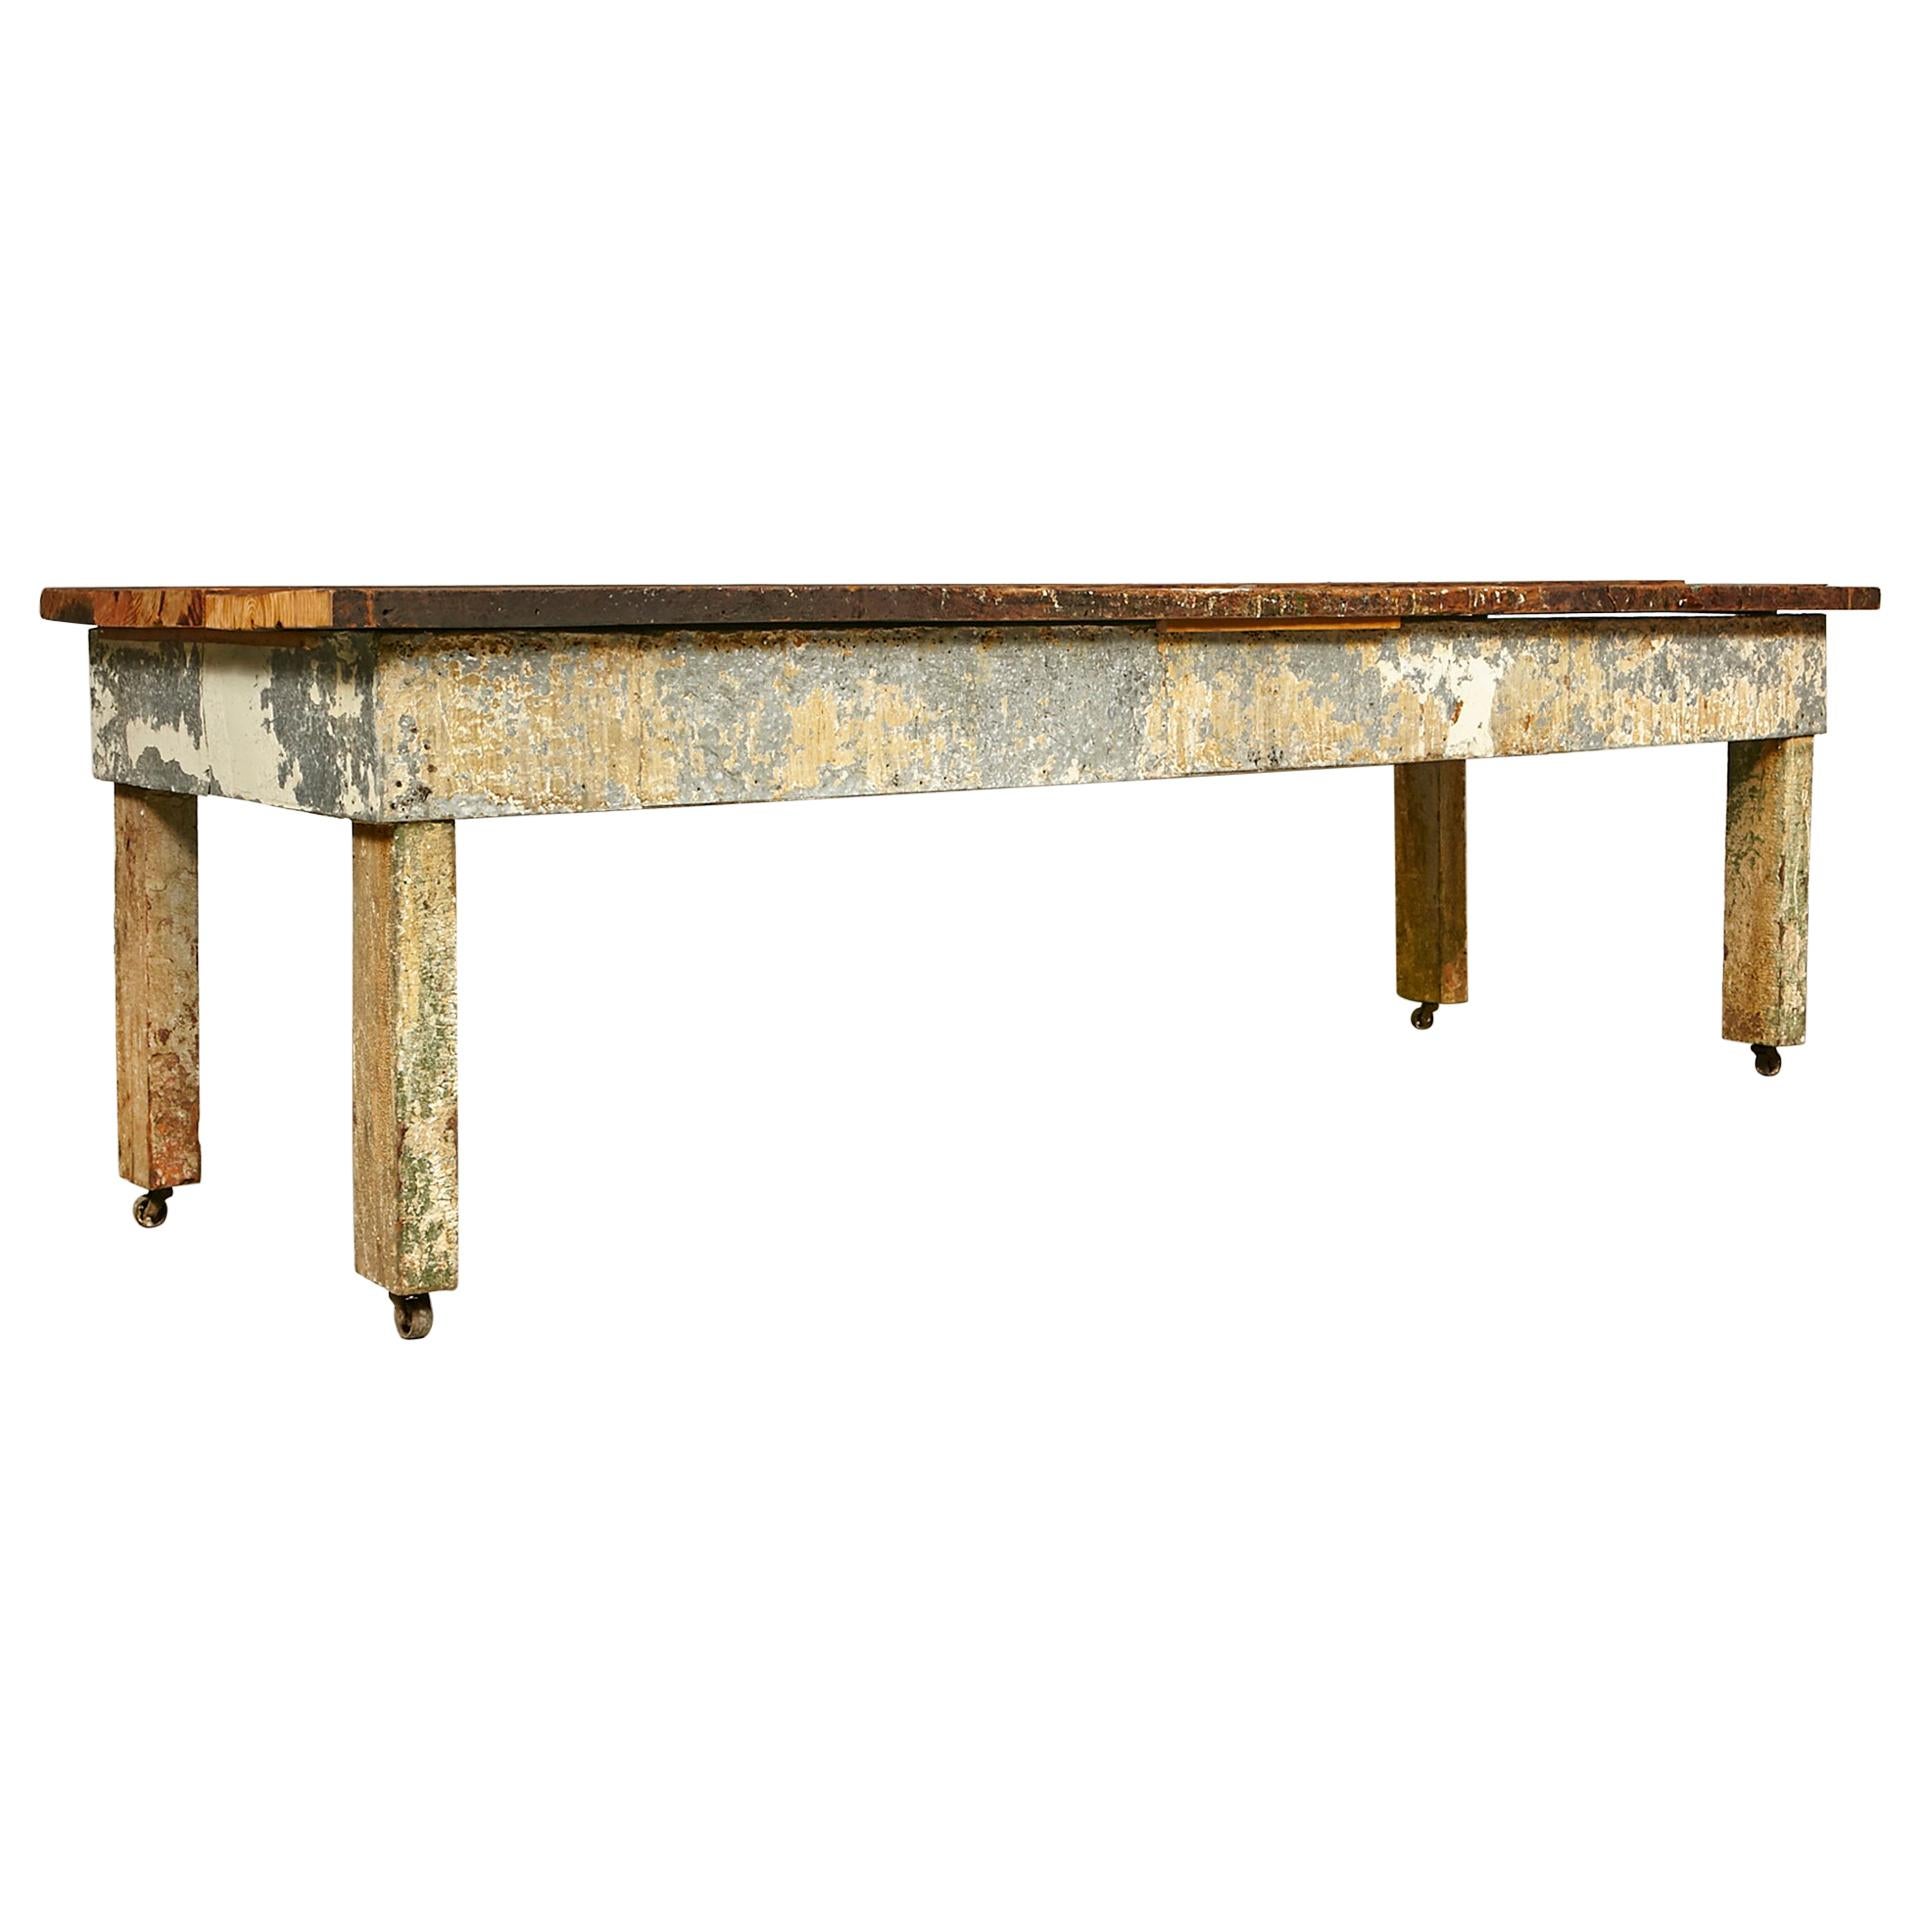 Rustic Wood Plank Top Country Table im Angebot